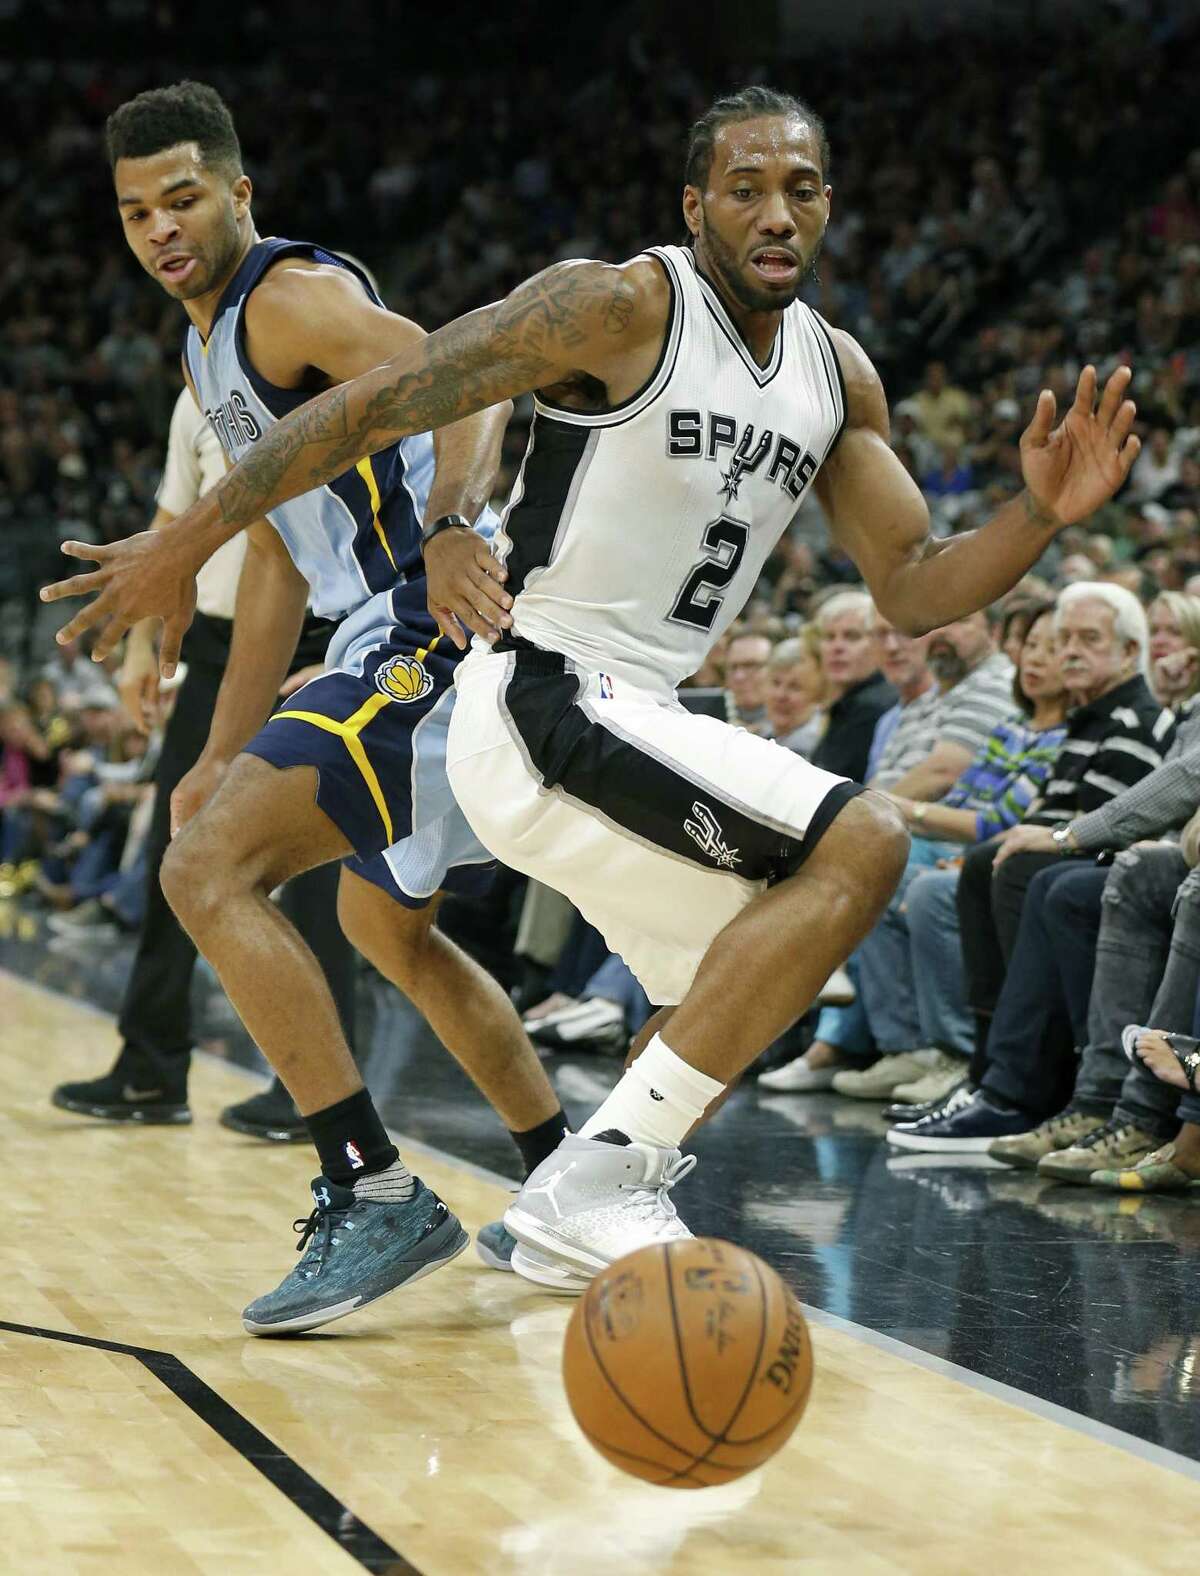 Memphis Grizzlies?• Andrew Harrison and San Antonio Spurs' Kawhi Leonard chase after a loose ball during first half action of Game 2 in the first round of the Western Conference playoffs held Monday April 17, 2017 at the AT&T Center.